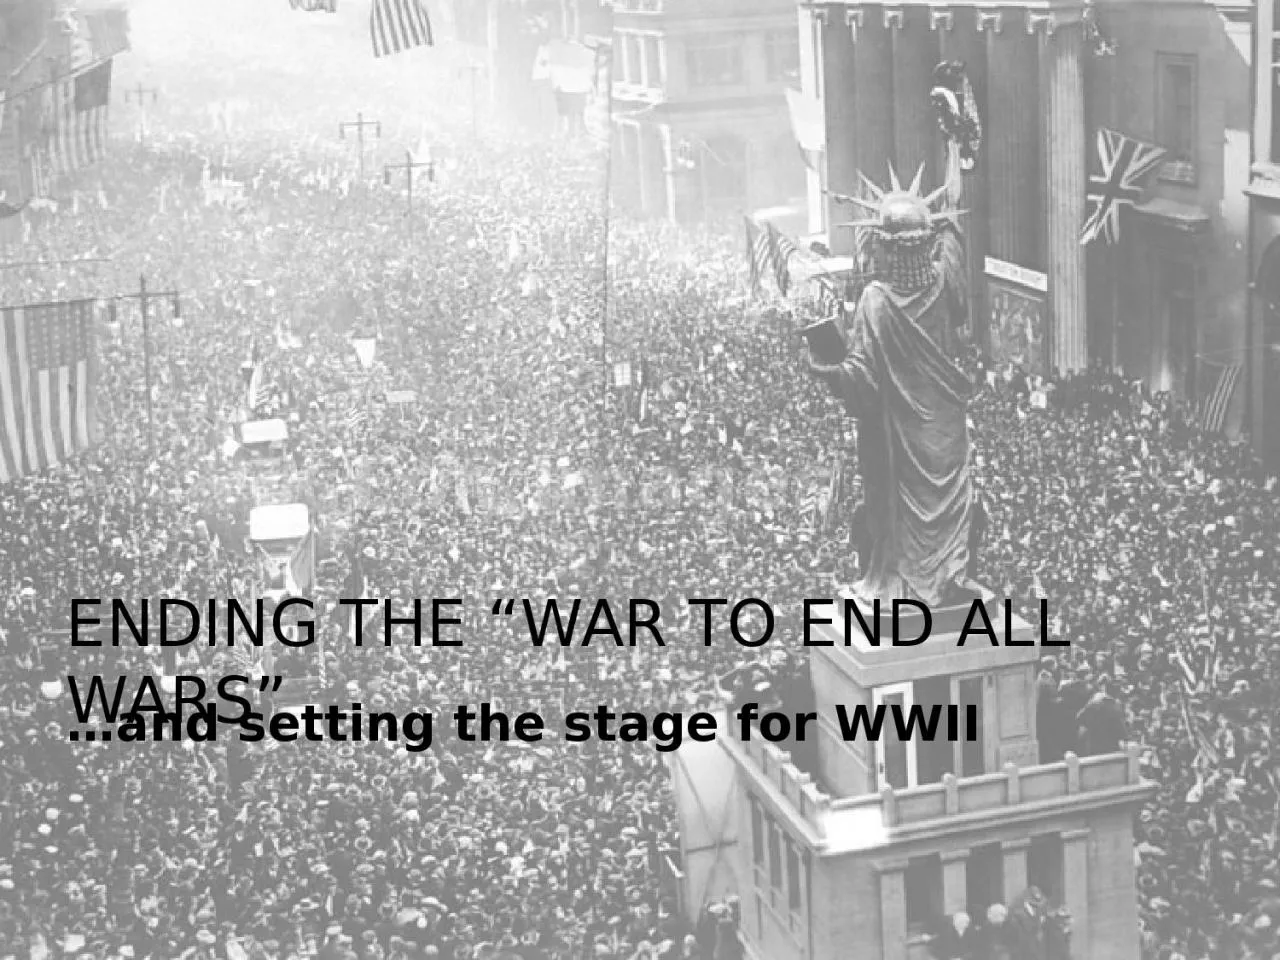 Ending the “War to end all Wars”